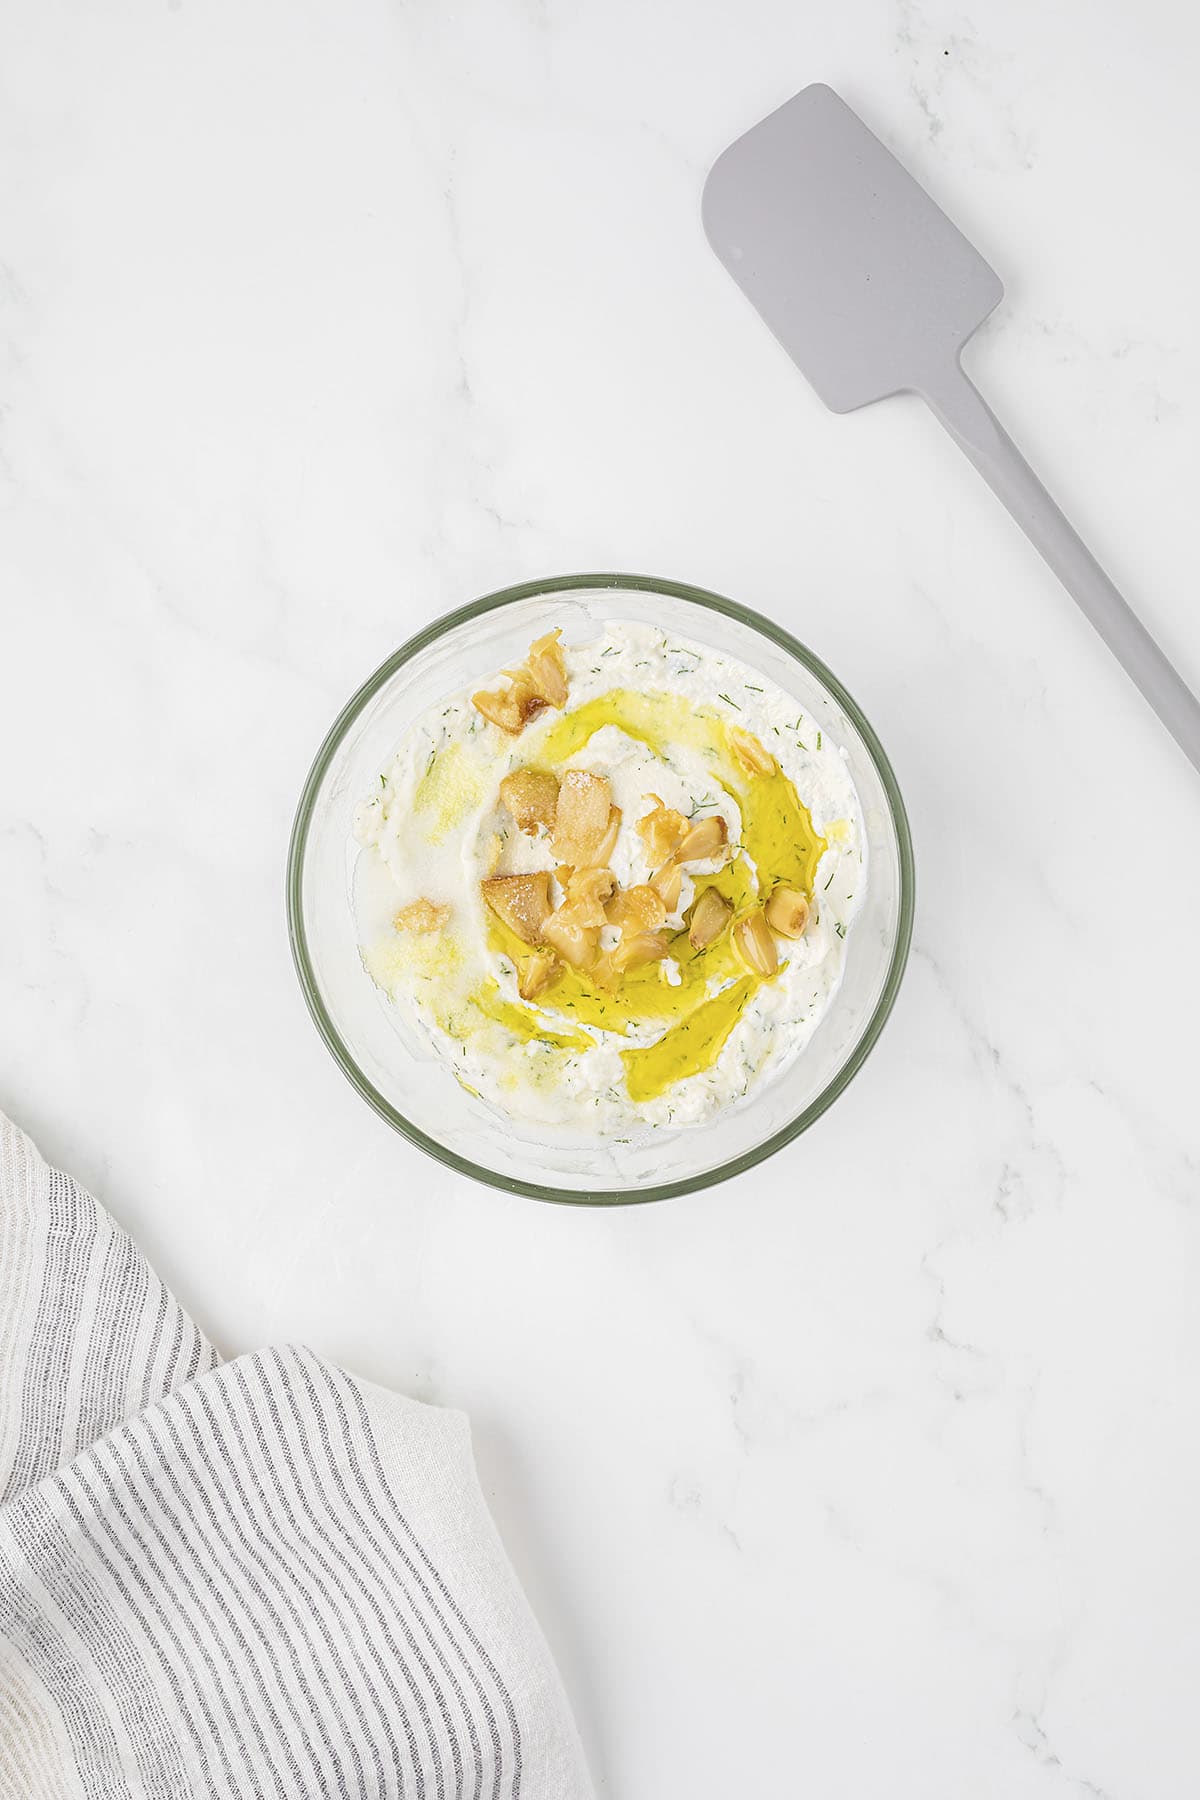 Roasted garlic and olive oil in bowl full of ricotta.